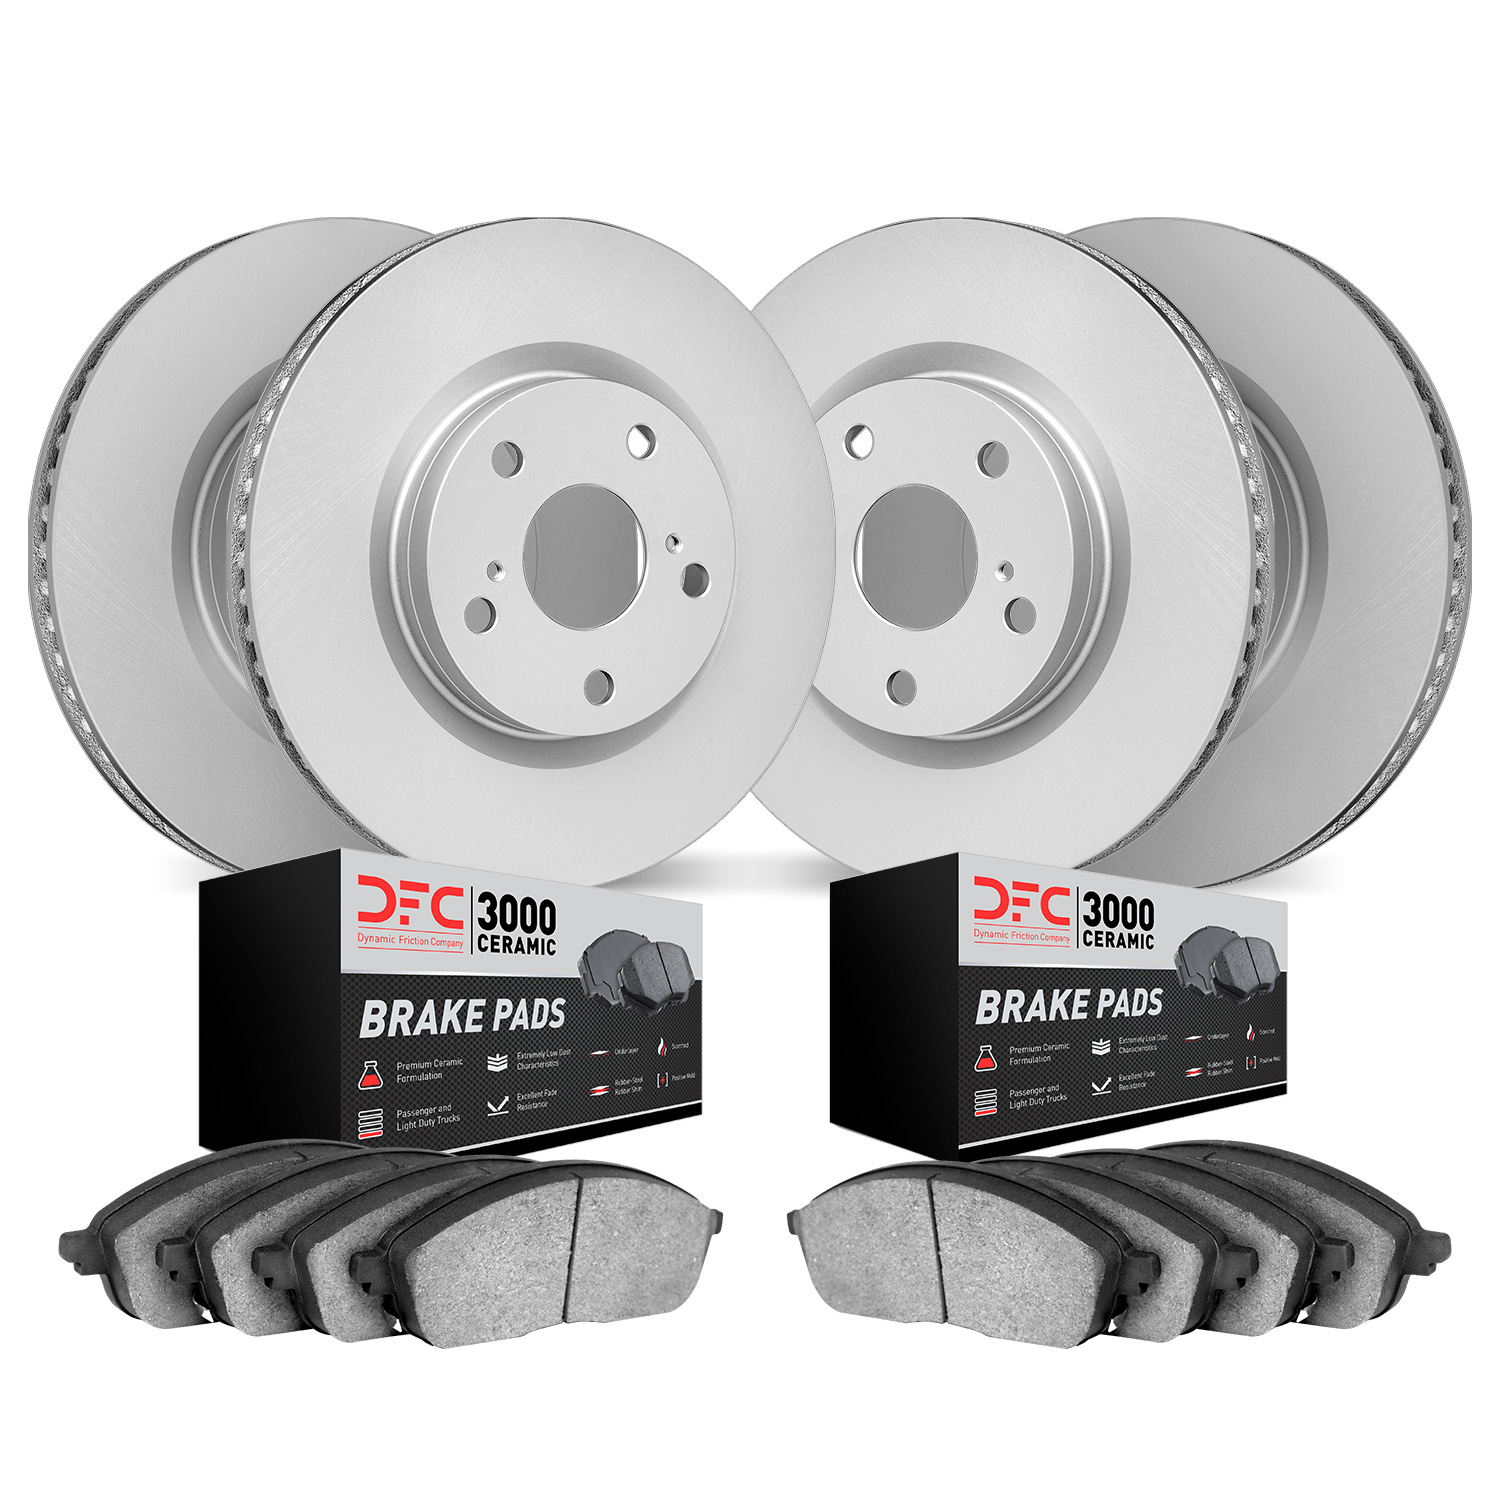 4304-75012 Geospec Brake Rotors with 3000-Series Ceramic Brake Pads Kit, 2014-2020 Lexus/Toyota/Scion, Position: Front and Rear